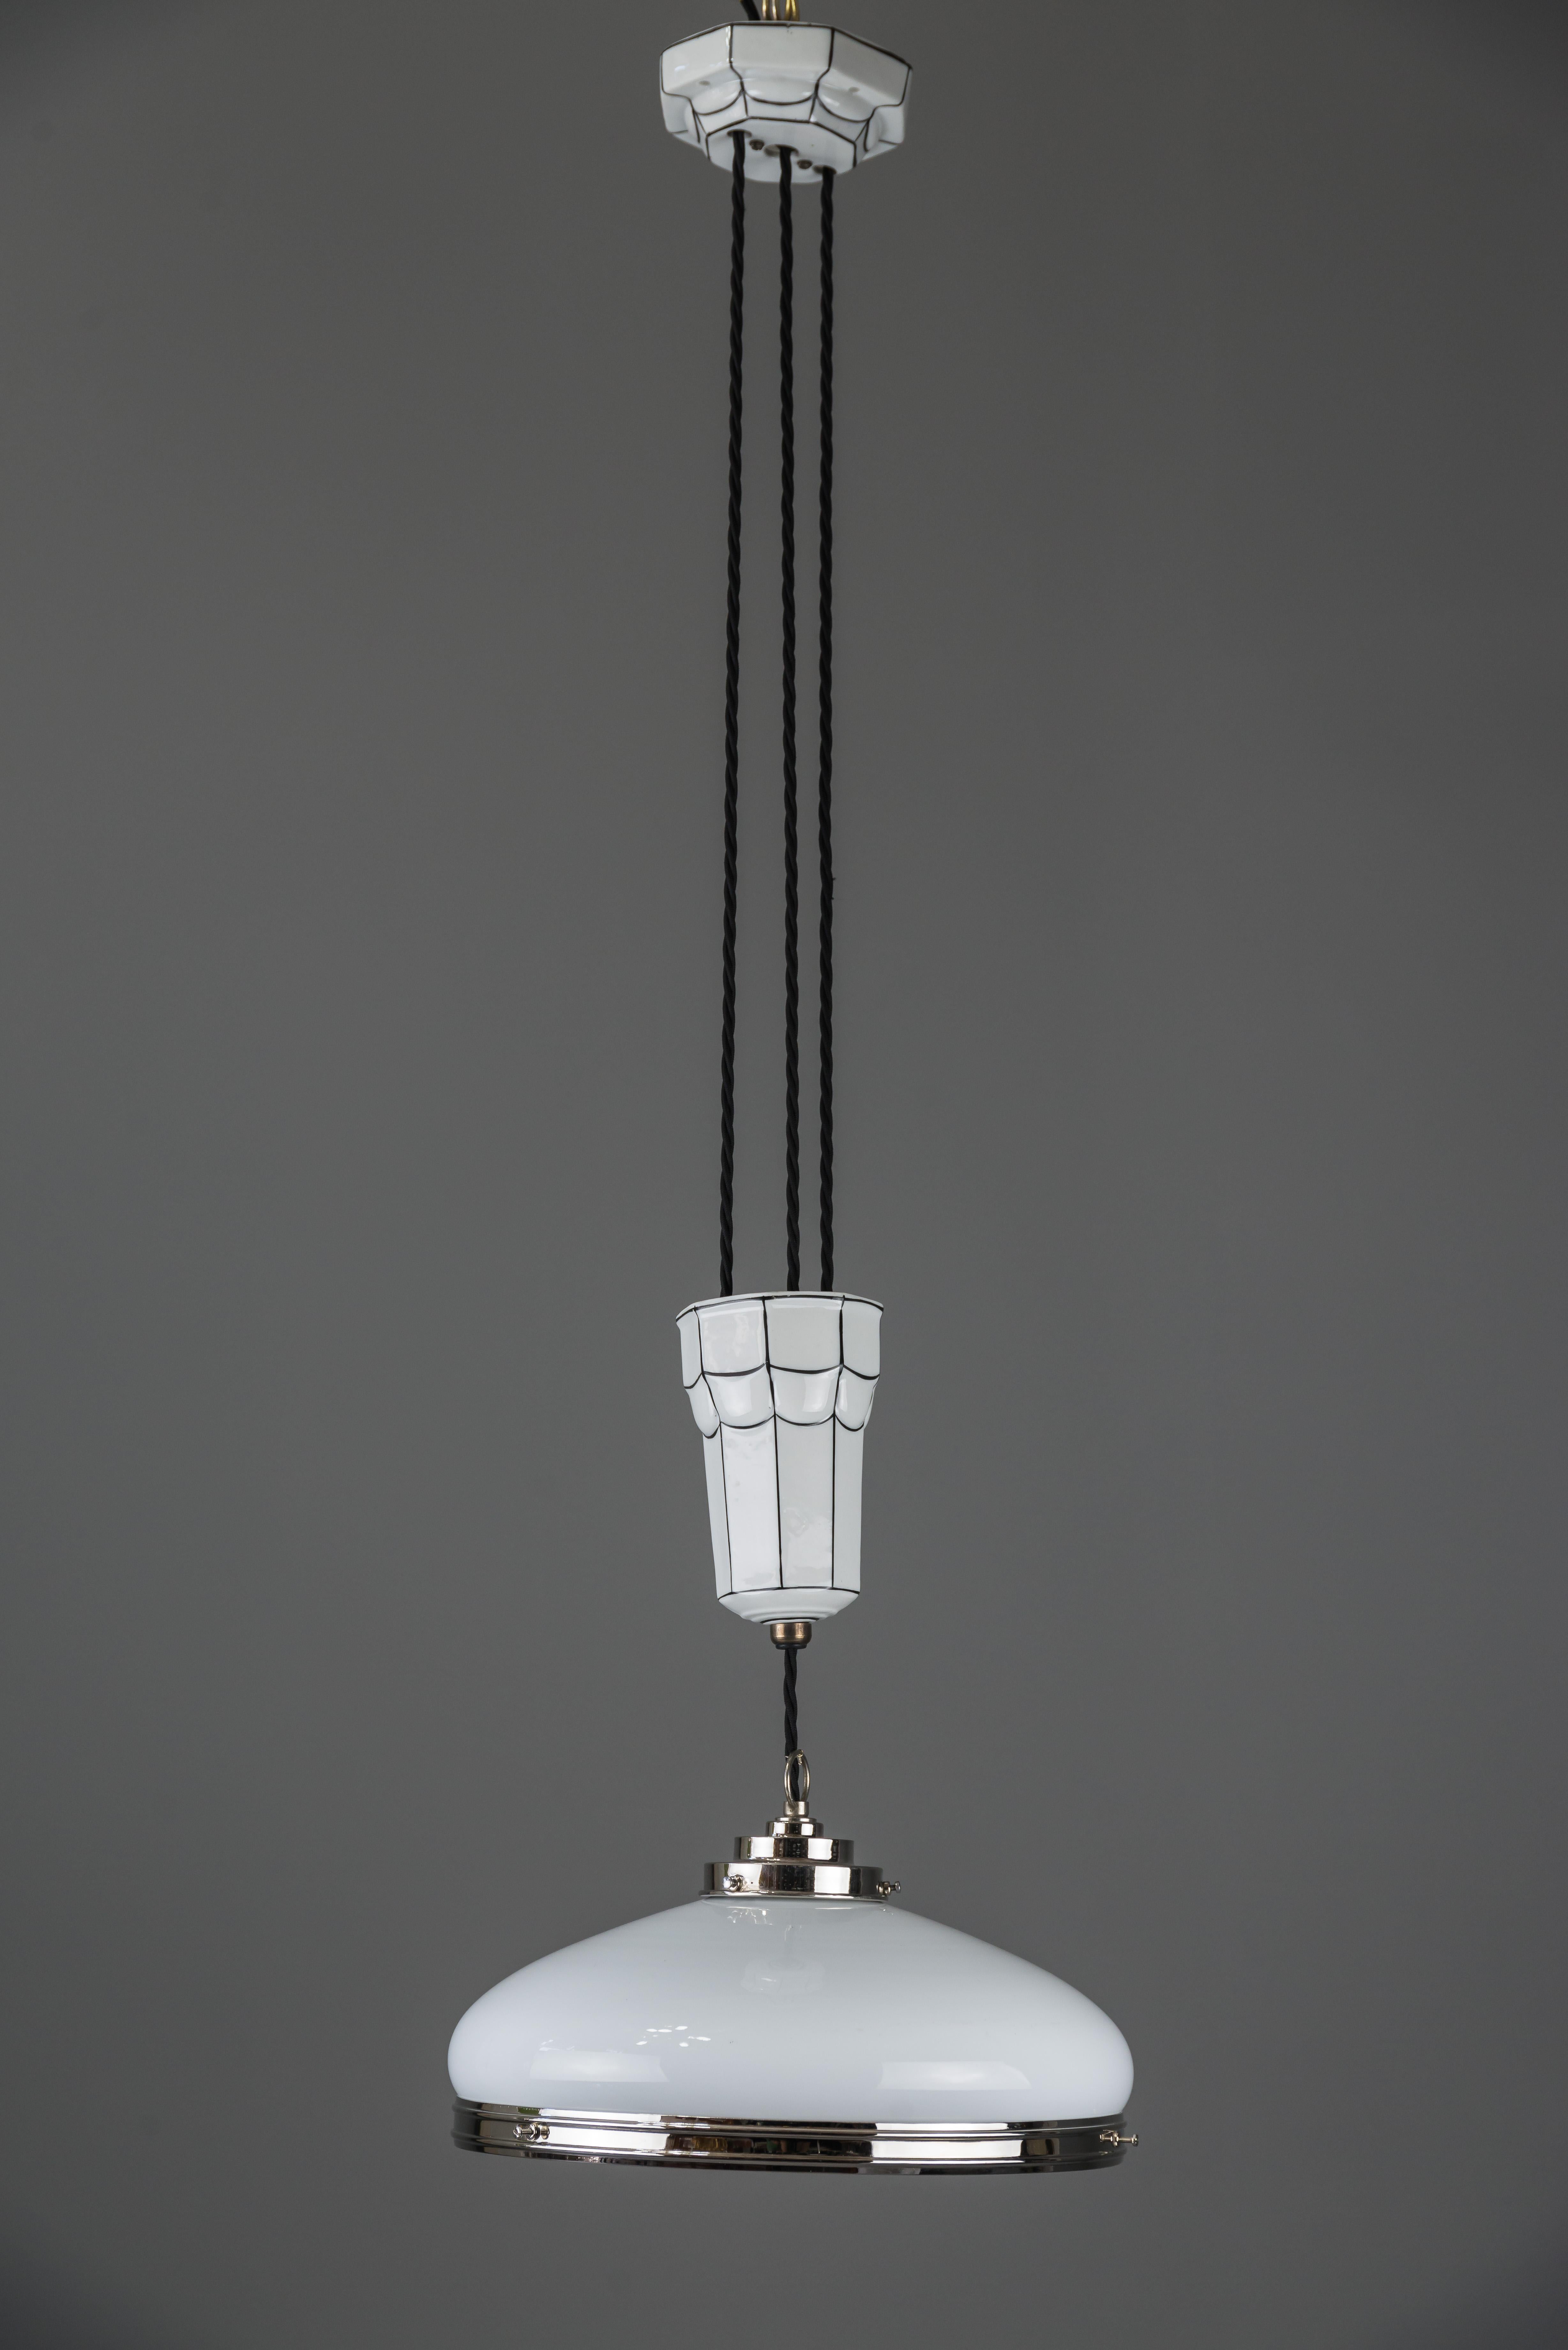 Adjustable Art Deco chandelier 1920s by Bauhaus
Porcelain and glass
Nickel-plated
Original shade
The high is adjustable from 102cm to 190cm.
   